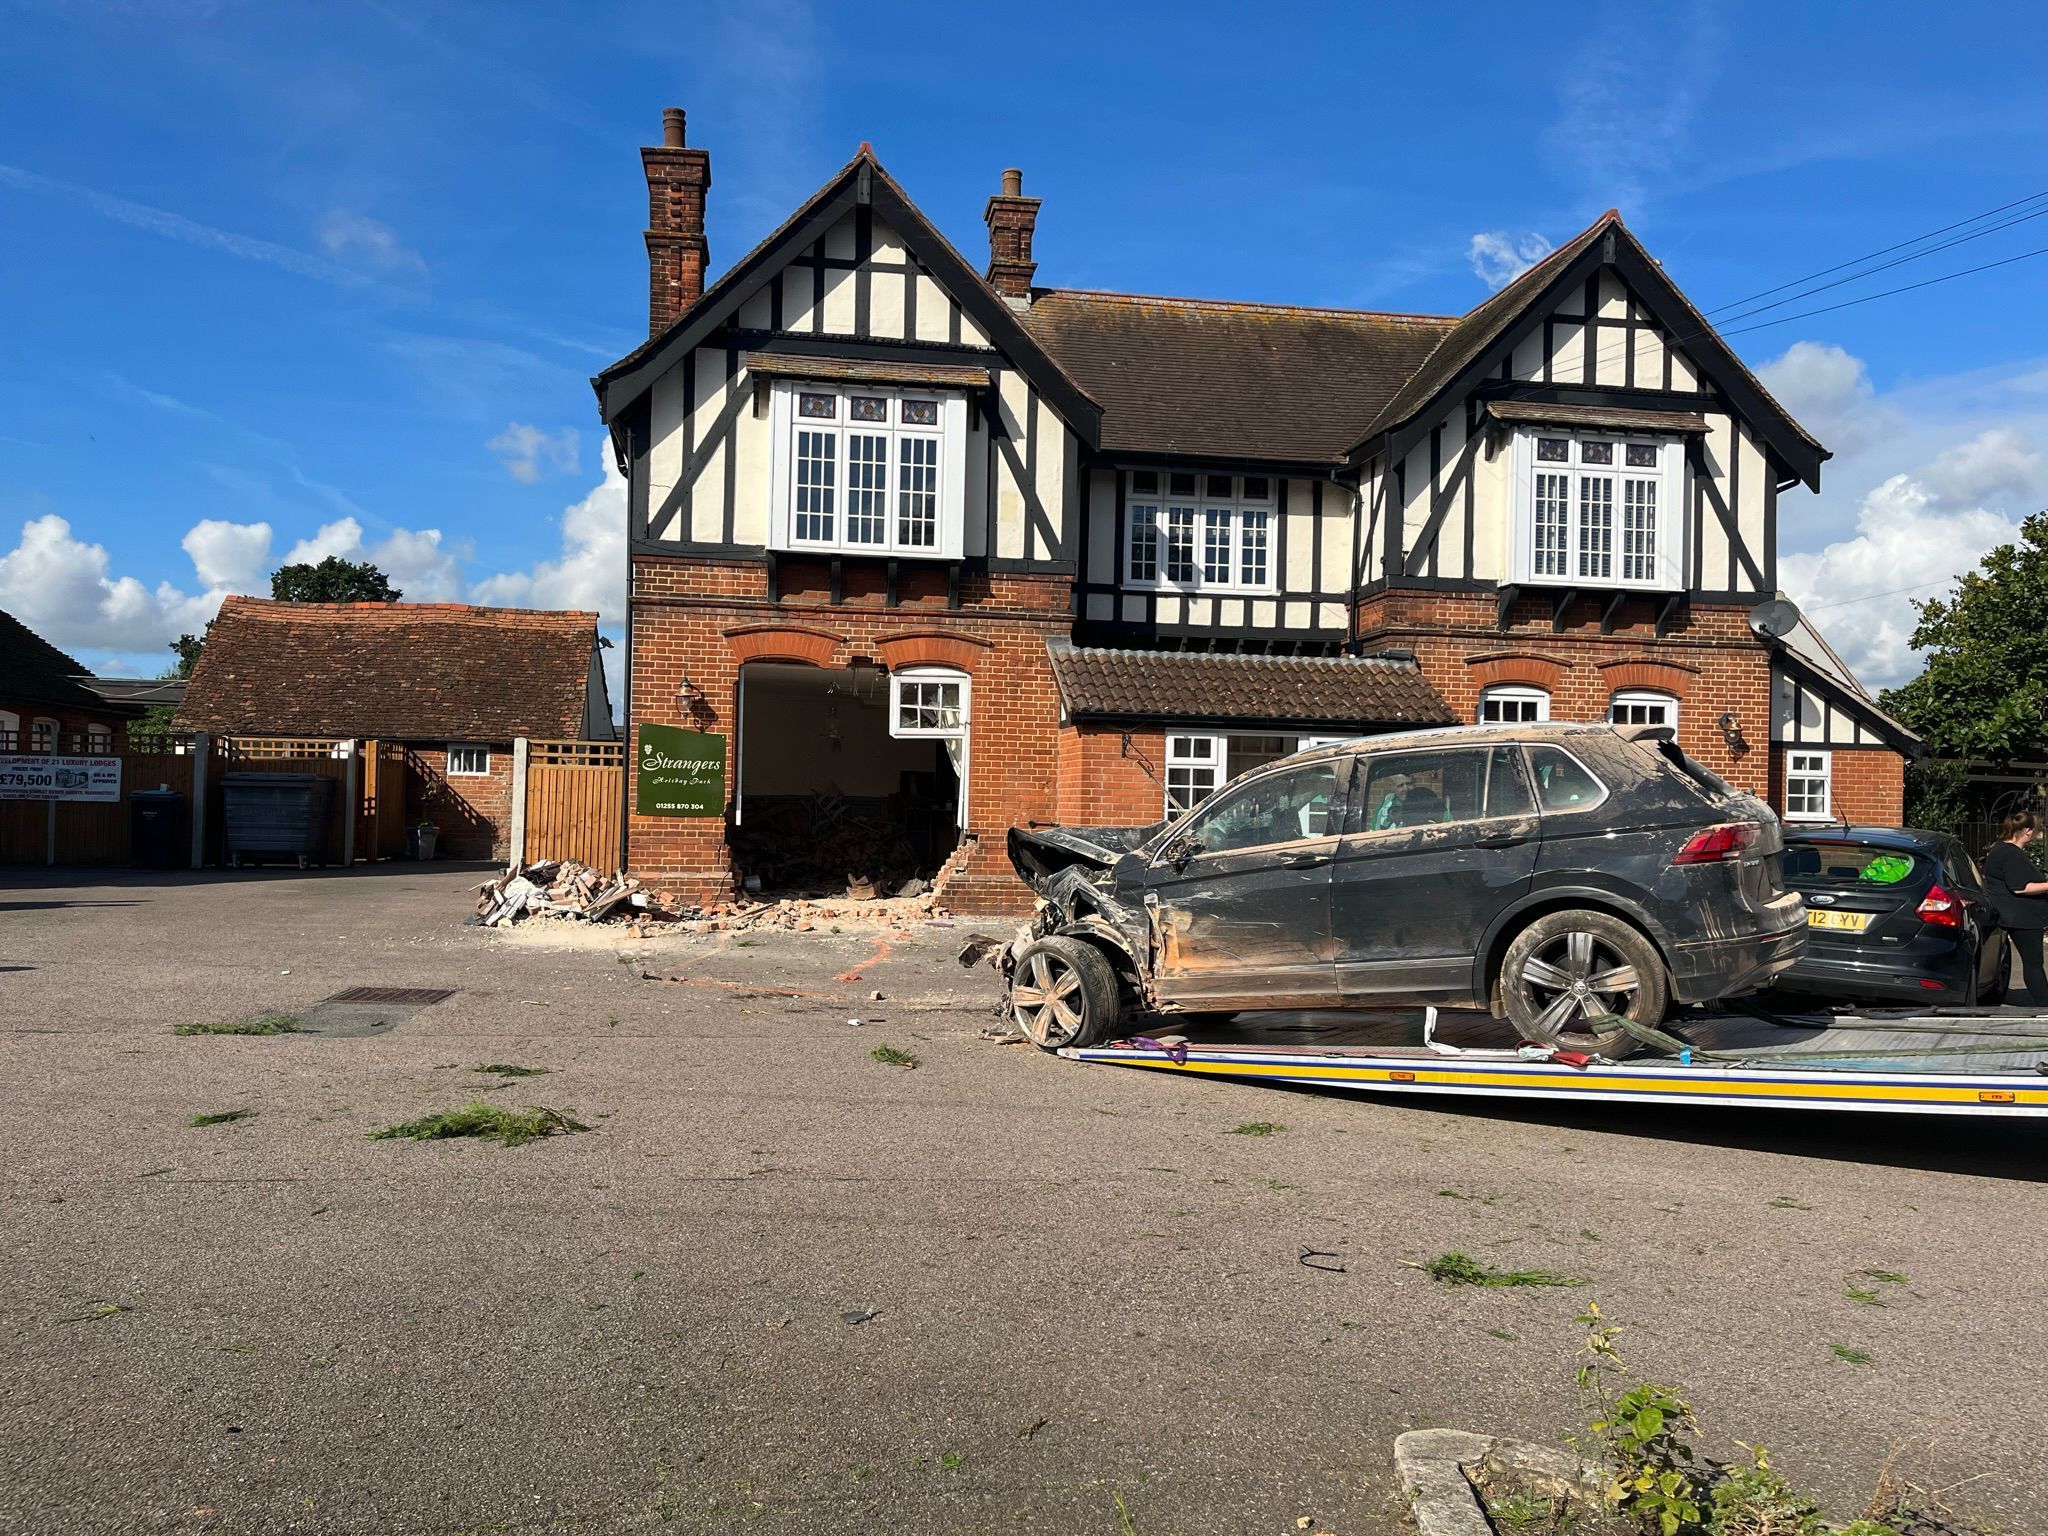 A damaged car outside the pub, which has a big hole in a wall, after the crash